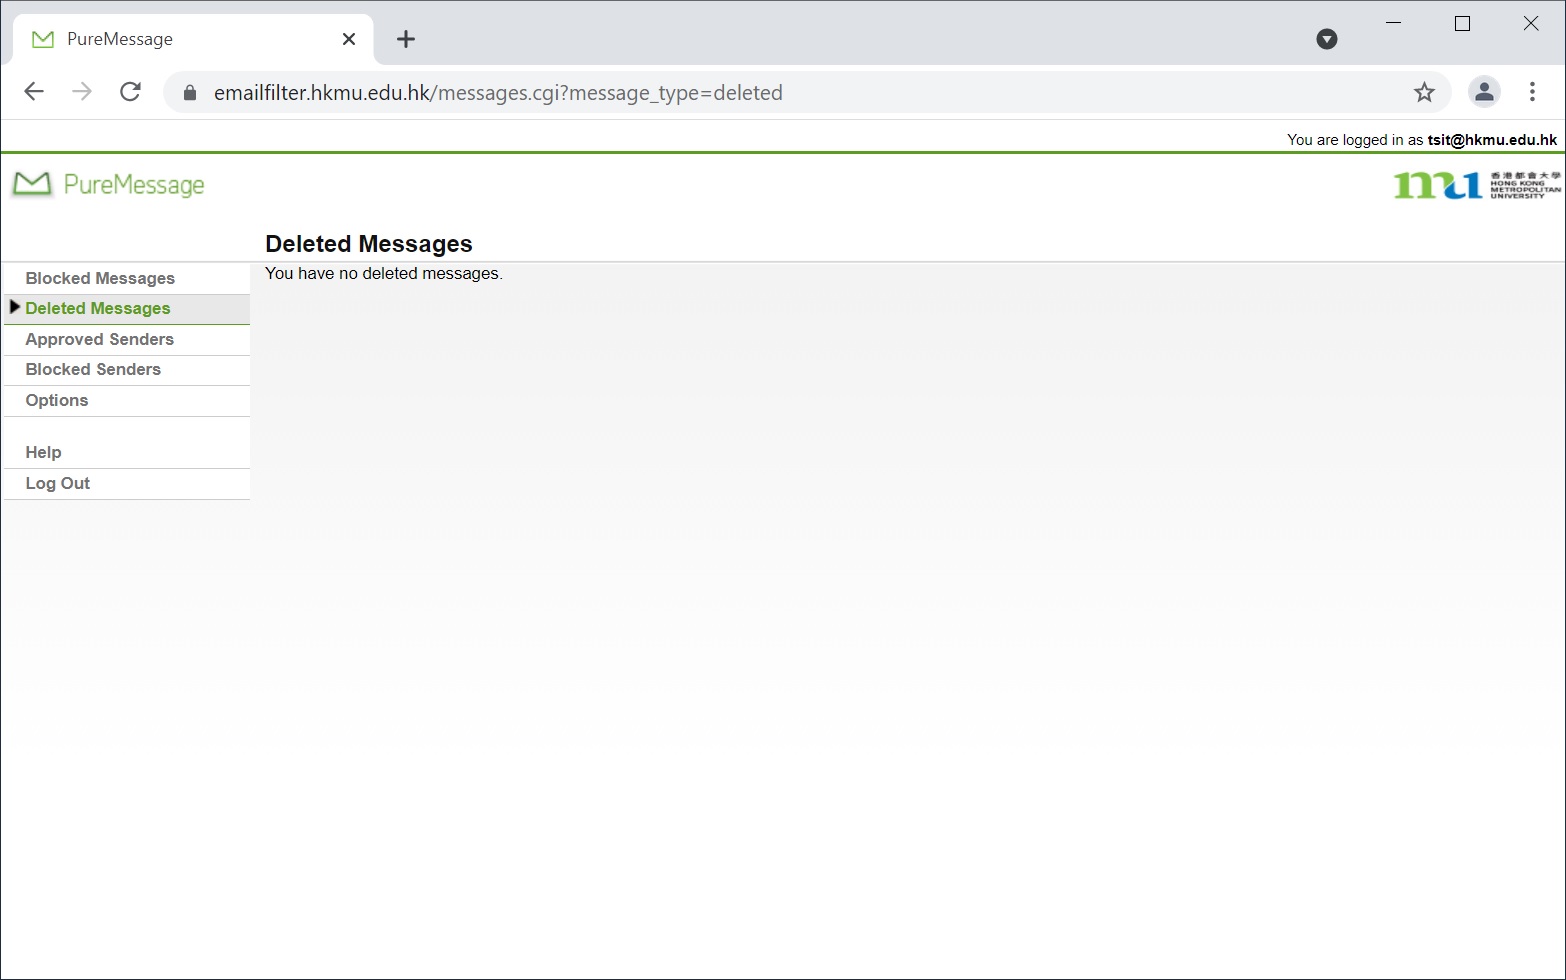 Deleted messages page